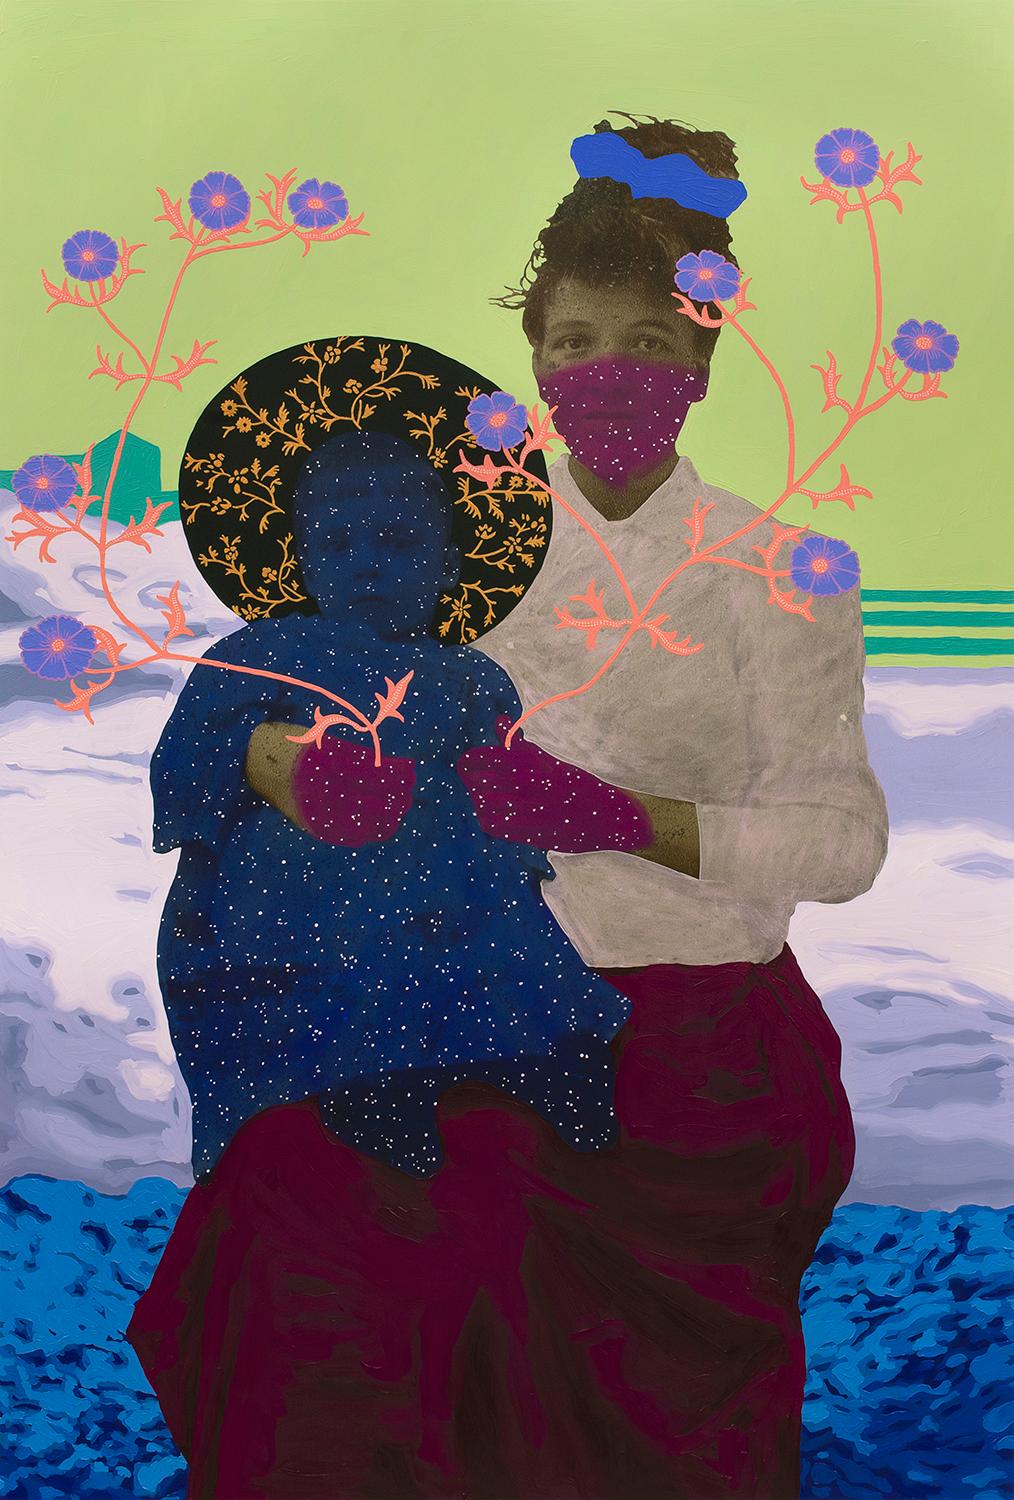 Untitled (Starry Mother and Child with Ocean Backdrop)